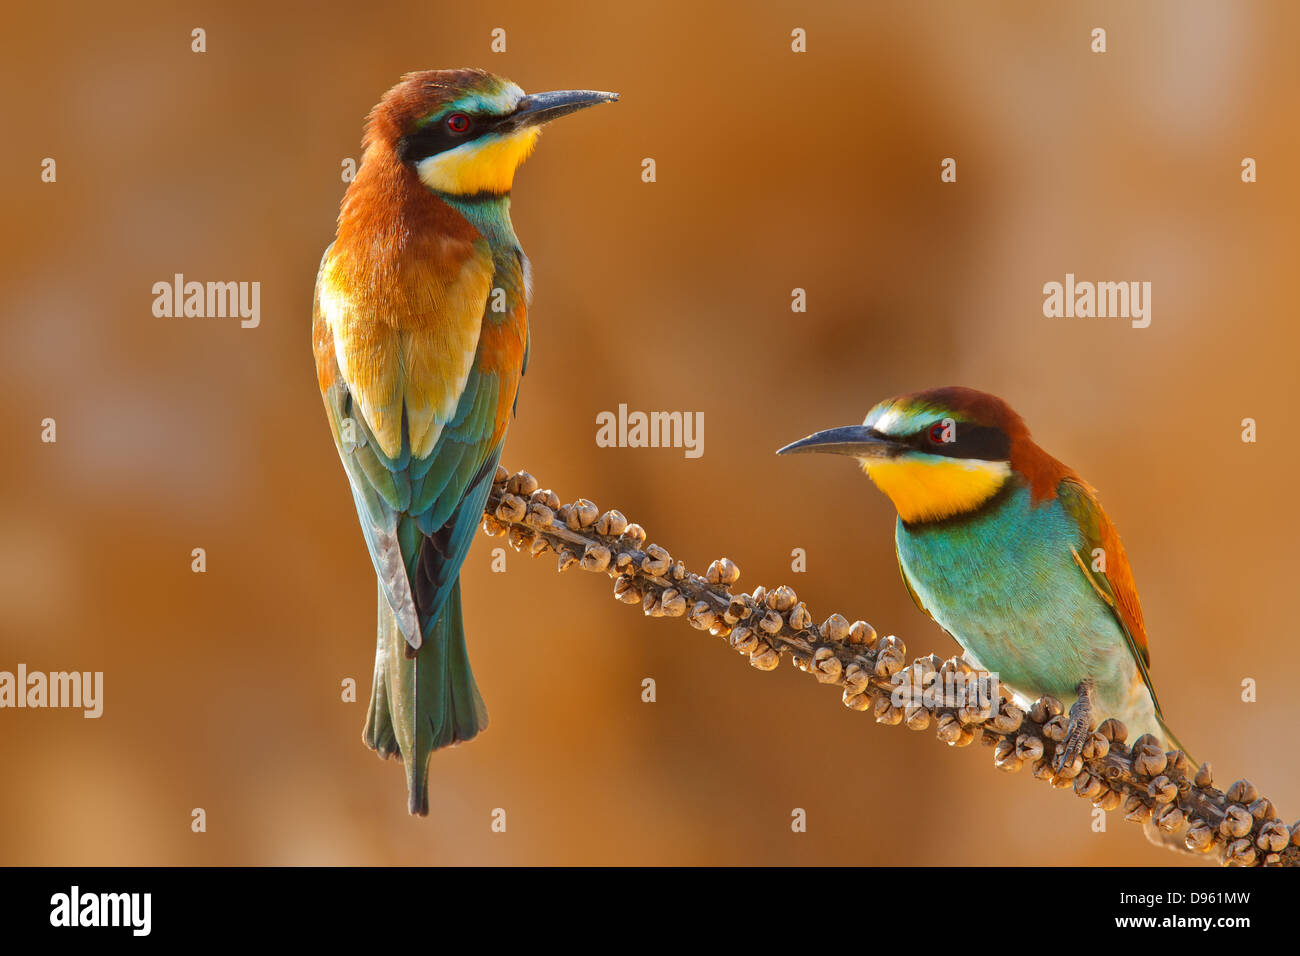 European bee-eater couple on a branch, Merops apiaster. Shallow depth of field and bakground blurred Stock Photo